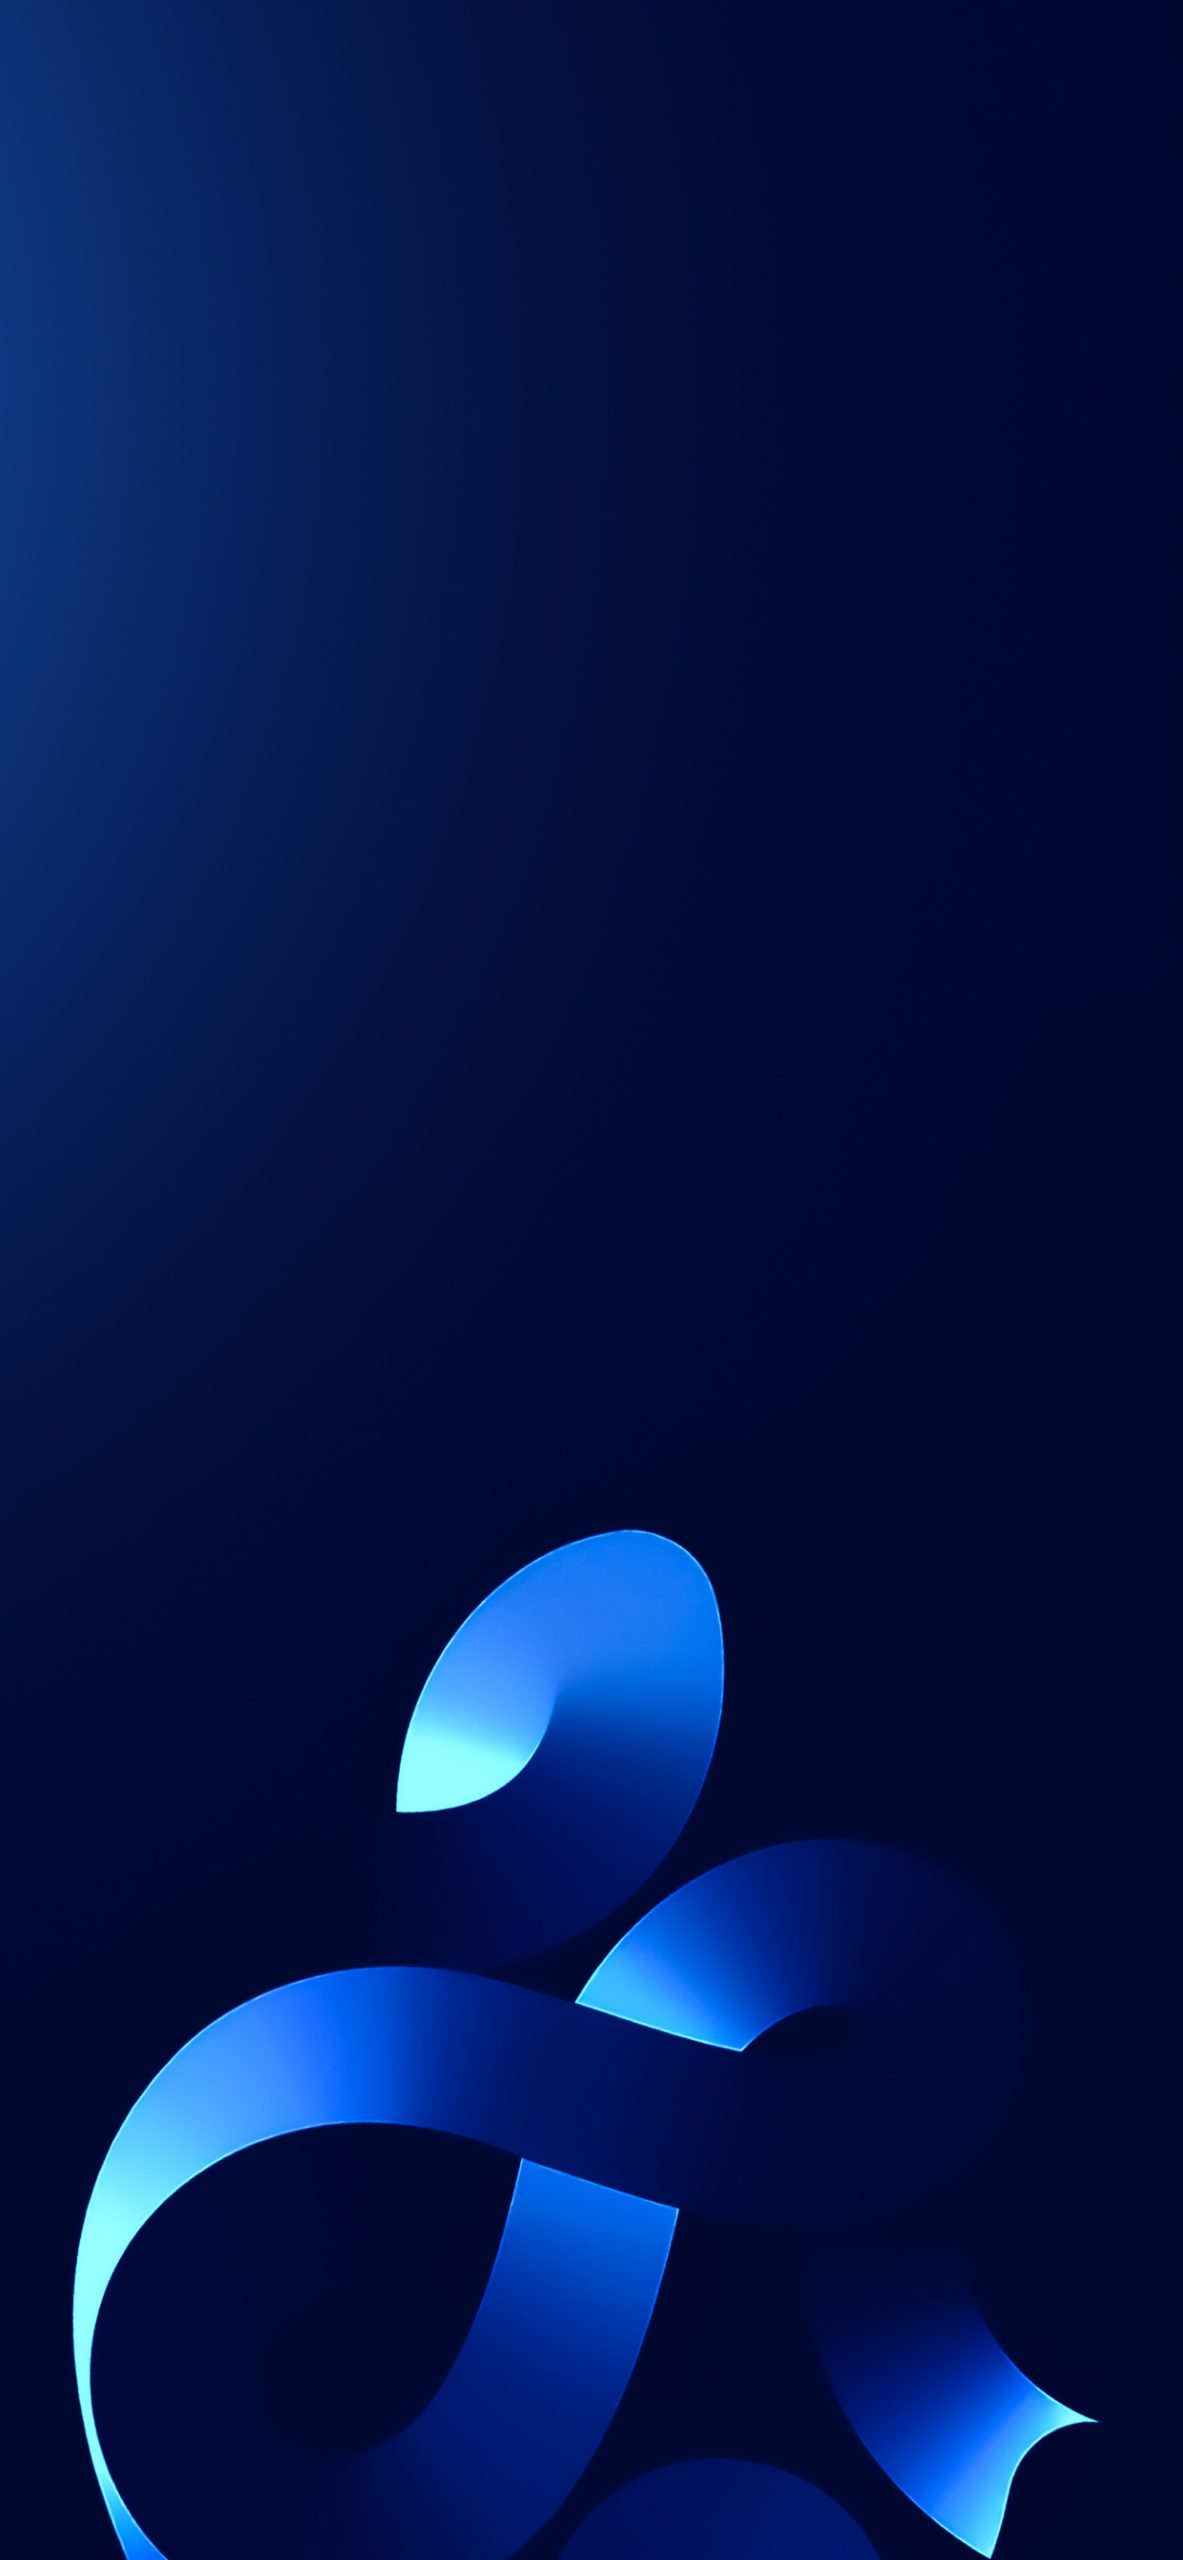 Apples September Special Event Wallpapers for iPhone and iPad  Beautiful  Pixels